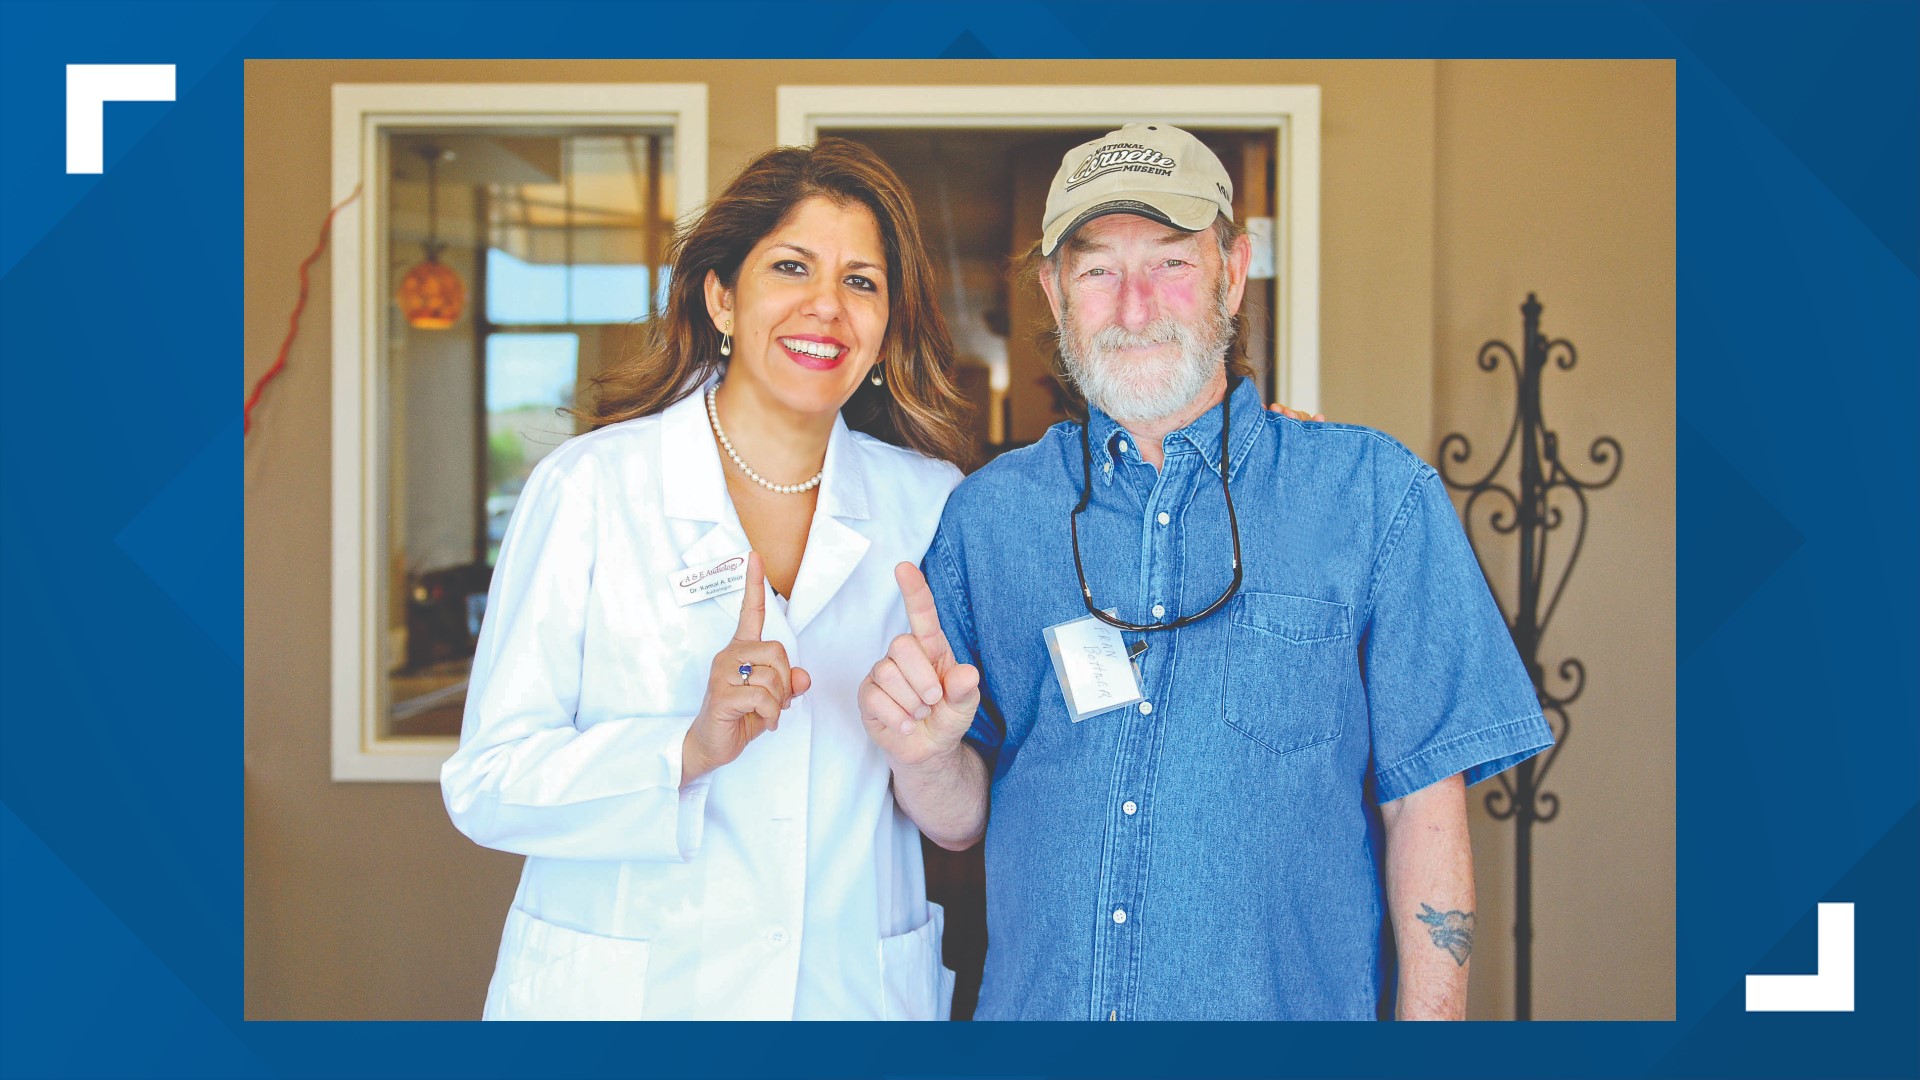 Since 2001, the doctors of A&E Audiology and Hearing Aid Center have helped over 20,000 patients with their hearing loss and hearing-related conditions.